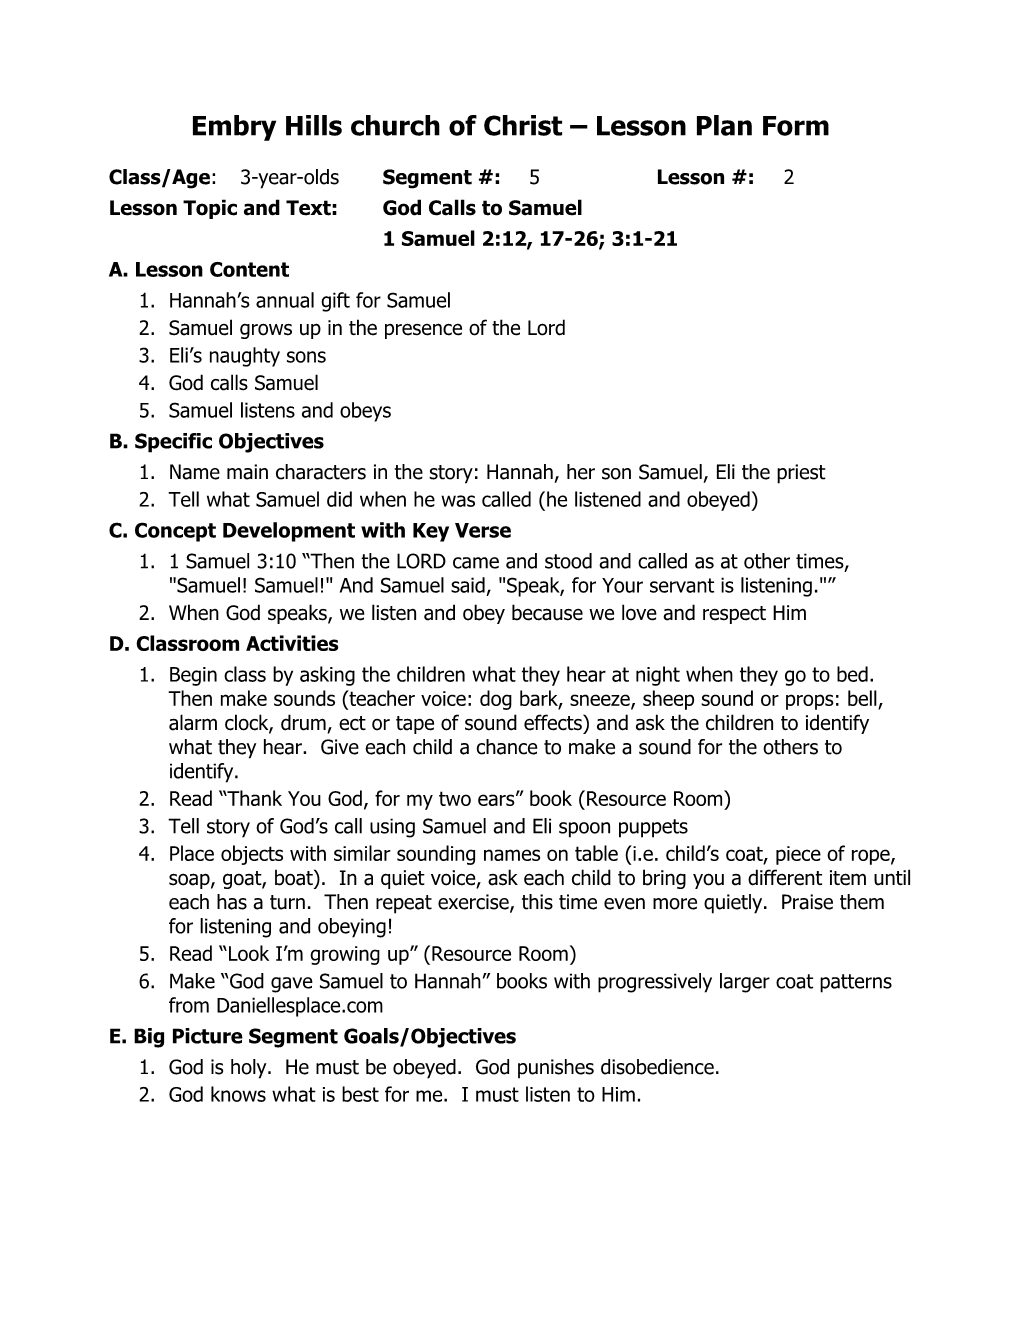 Embry Hills Church of Christ Lesson Plan Form s1